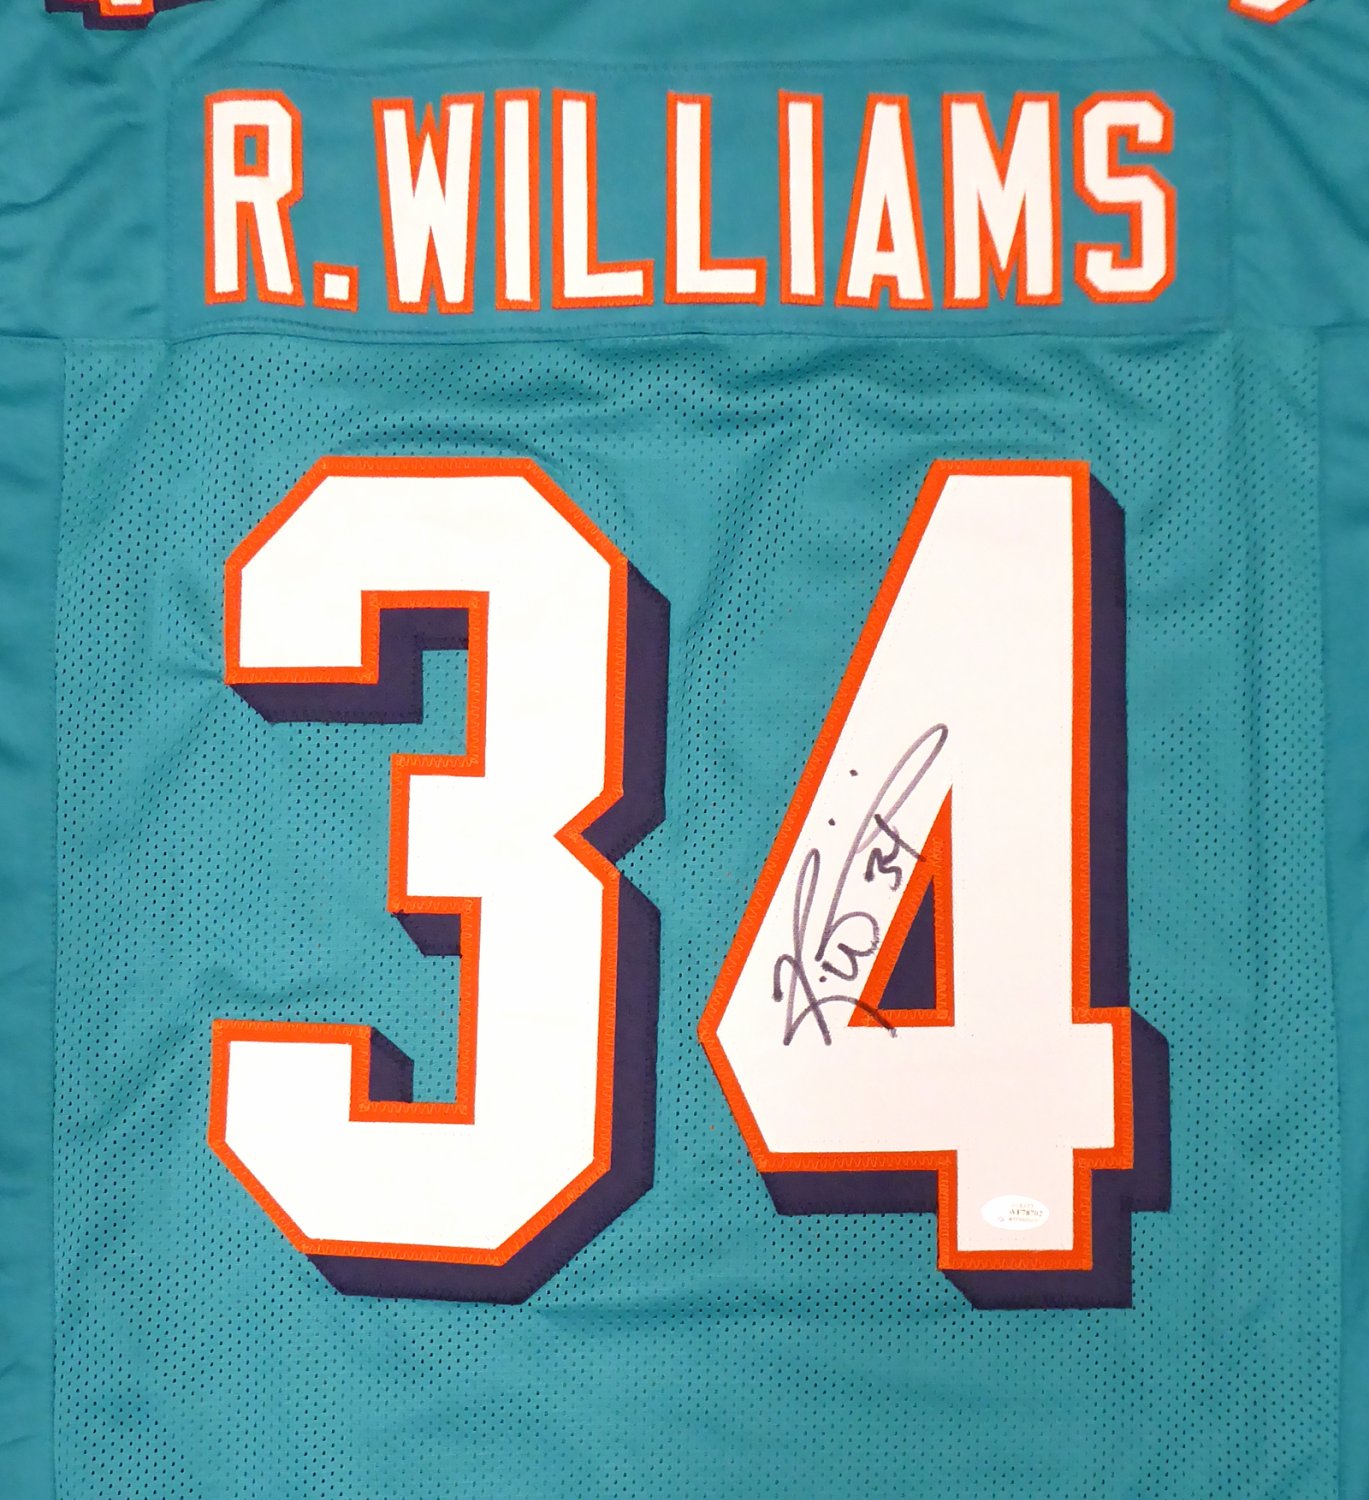 ricky williams jersey for sale